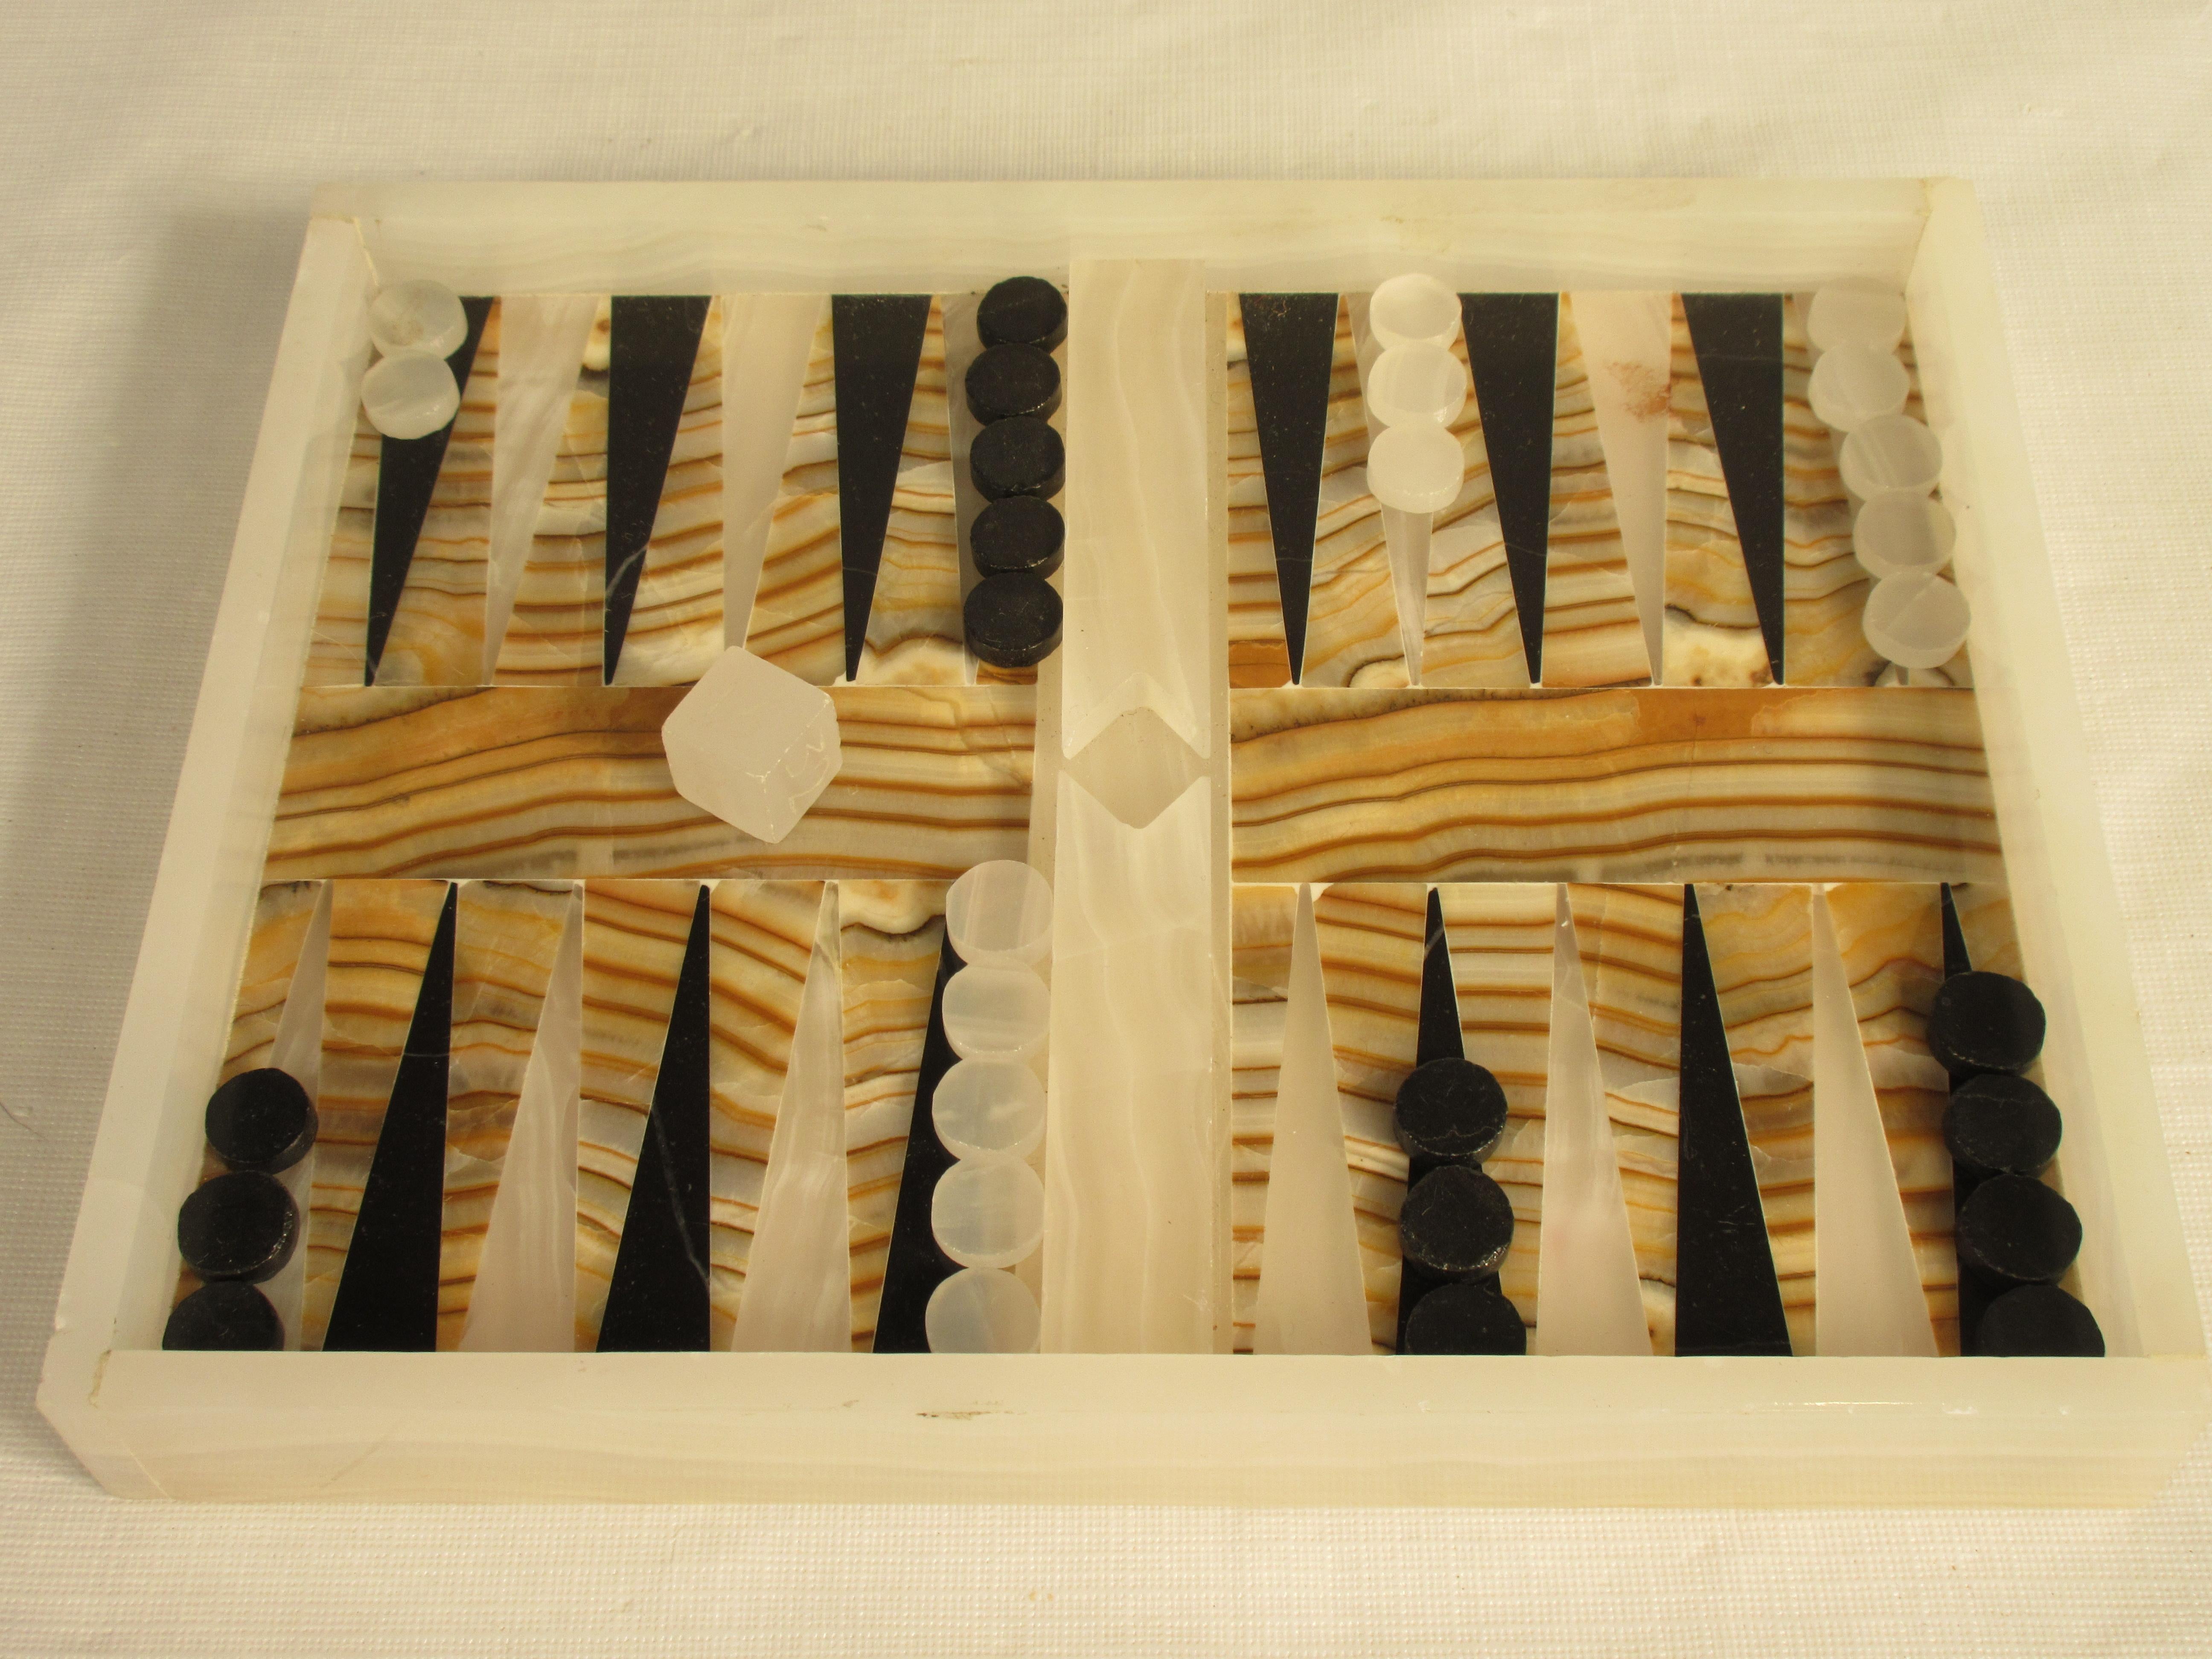 1960s onyx and marble backgammon set. One black piece is missing.